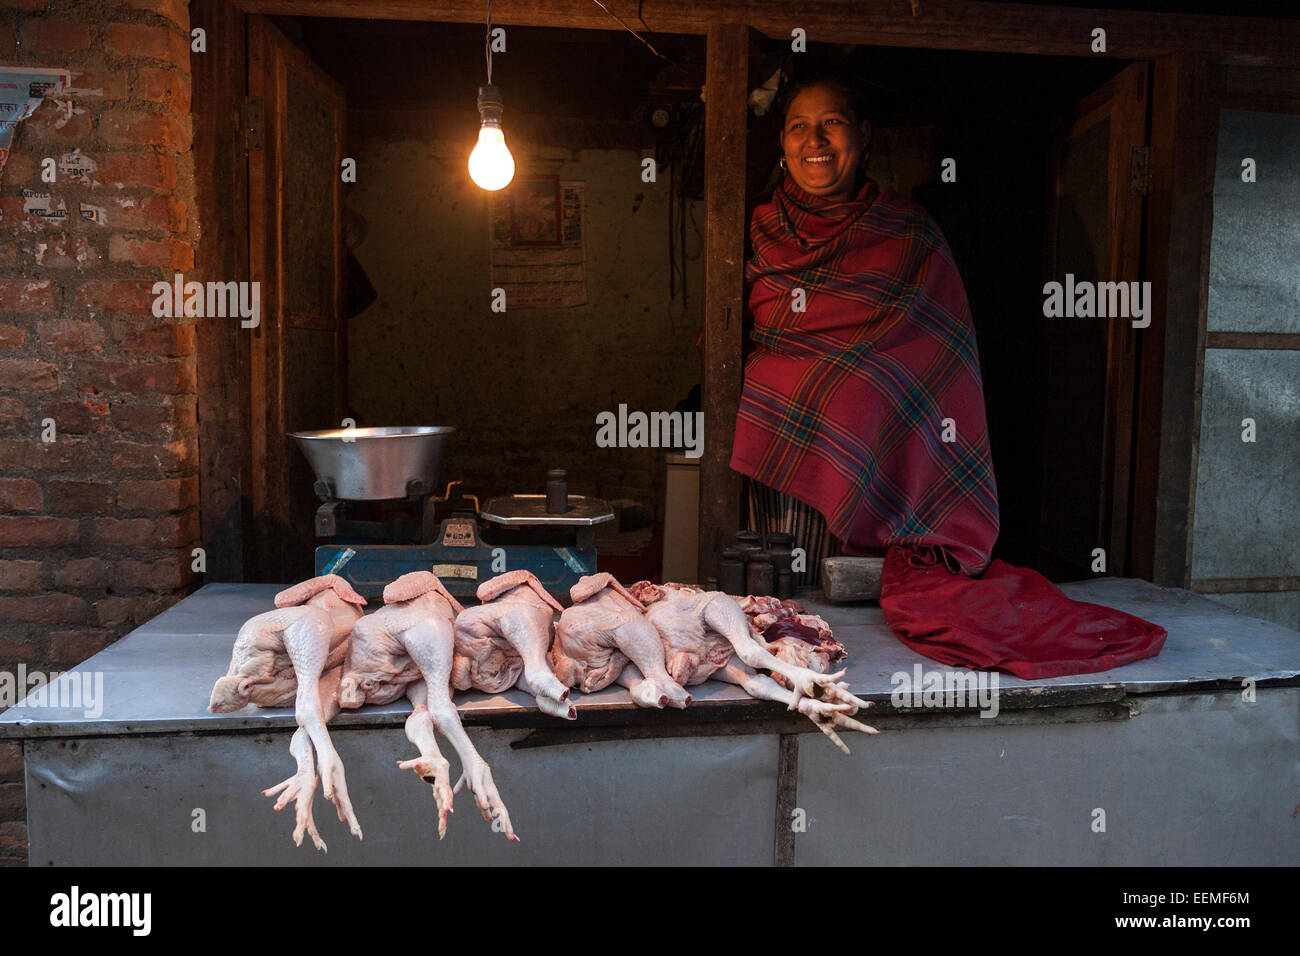 Stand, poultry sale, Nepalese, Patan, Nepal Stock Photo